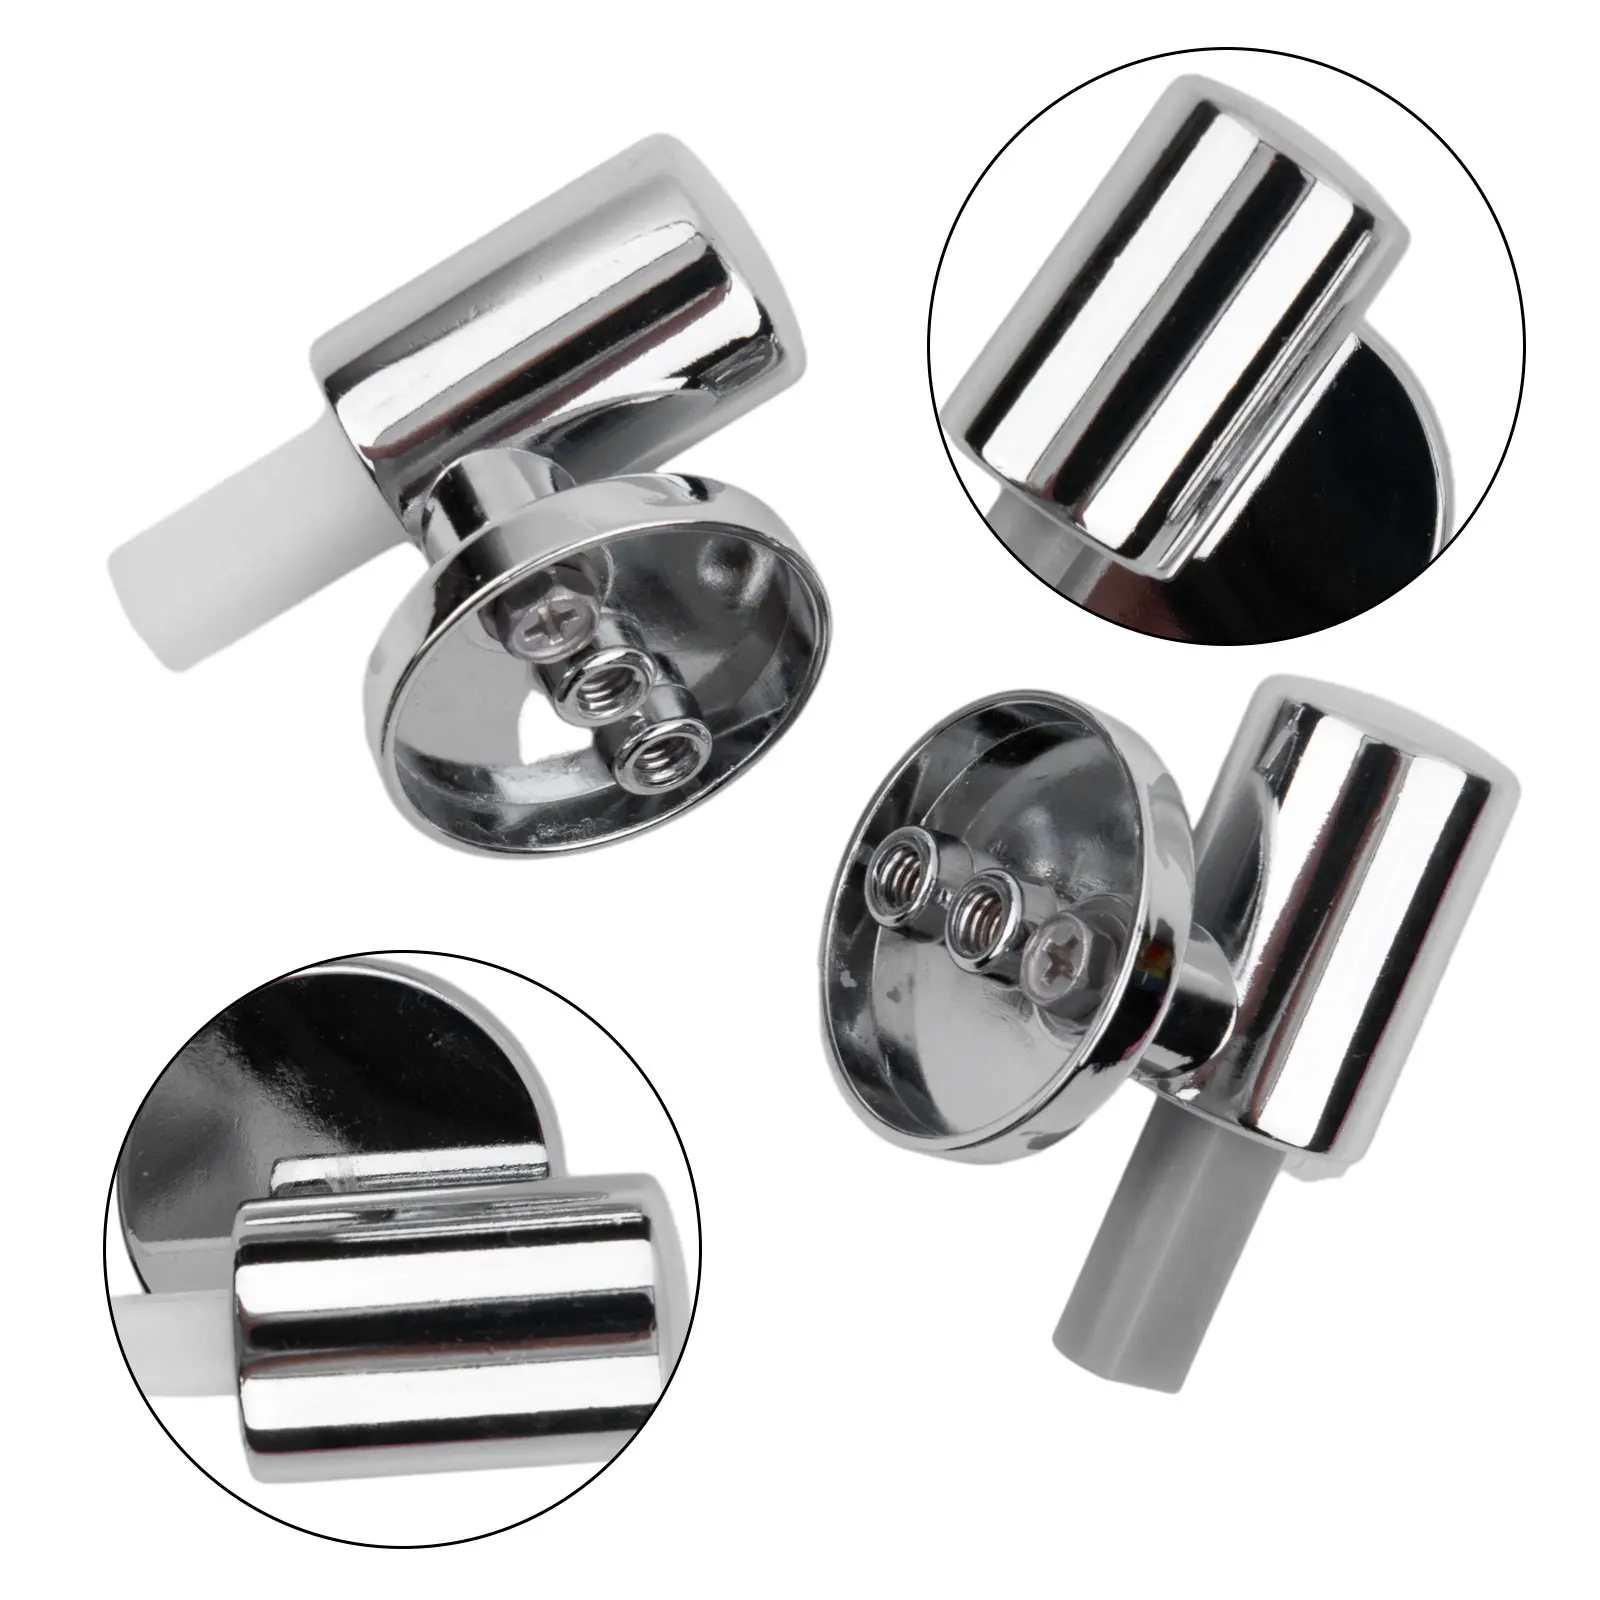 Hardware Toilet Hinges Home Improvement Furniture Hardware Replacement Soft Close Hinges Toilet Top Fixing Method for most toilet hinges toilet cover for tile replacement replacement hinges stainless steel toilet cover hinge 1 pair